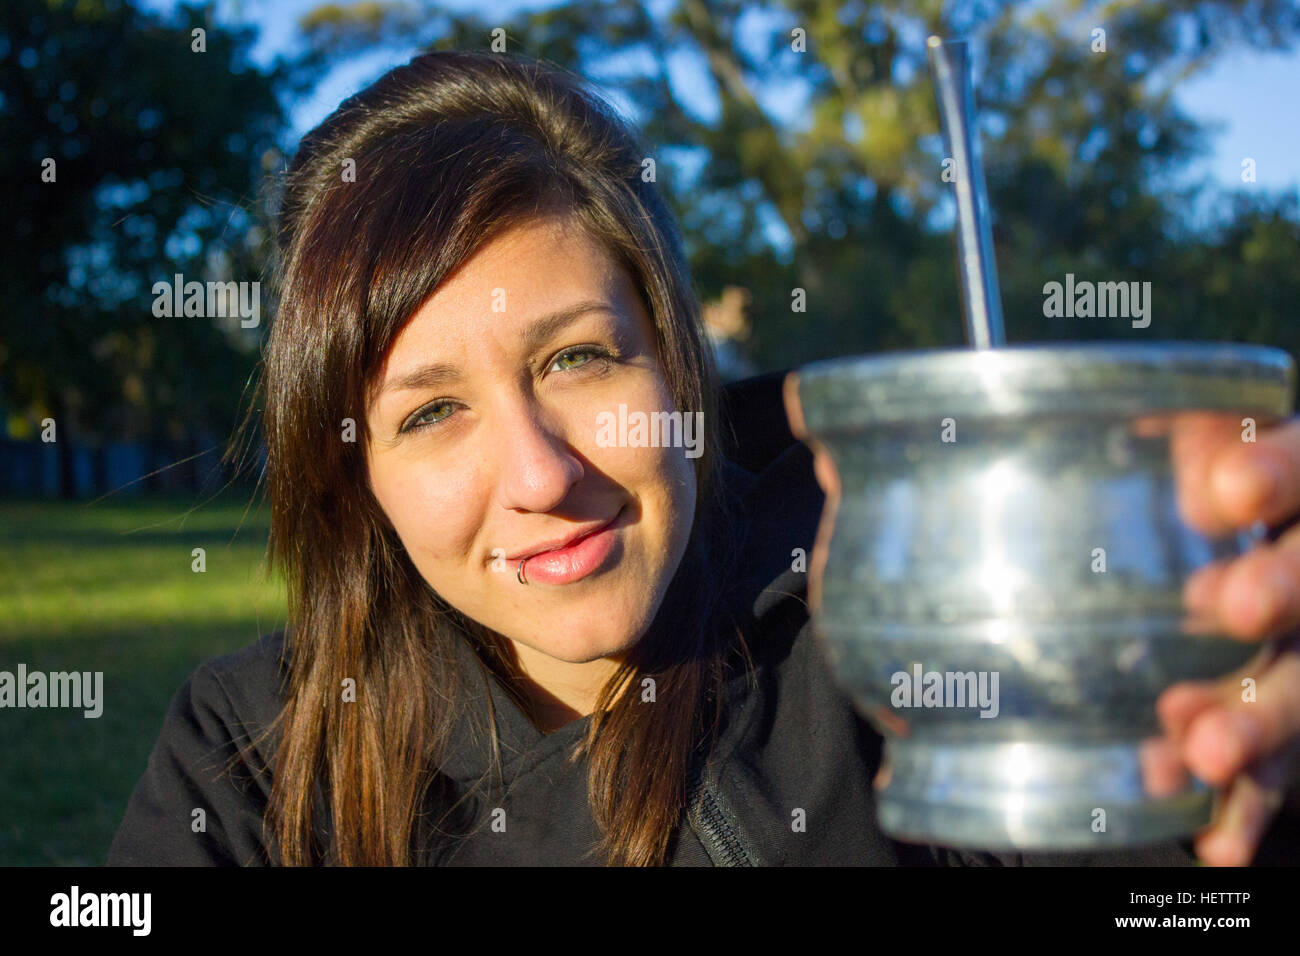 Young woman at the park smiling and drinking mate Stock Photo